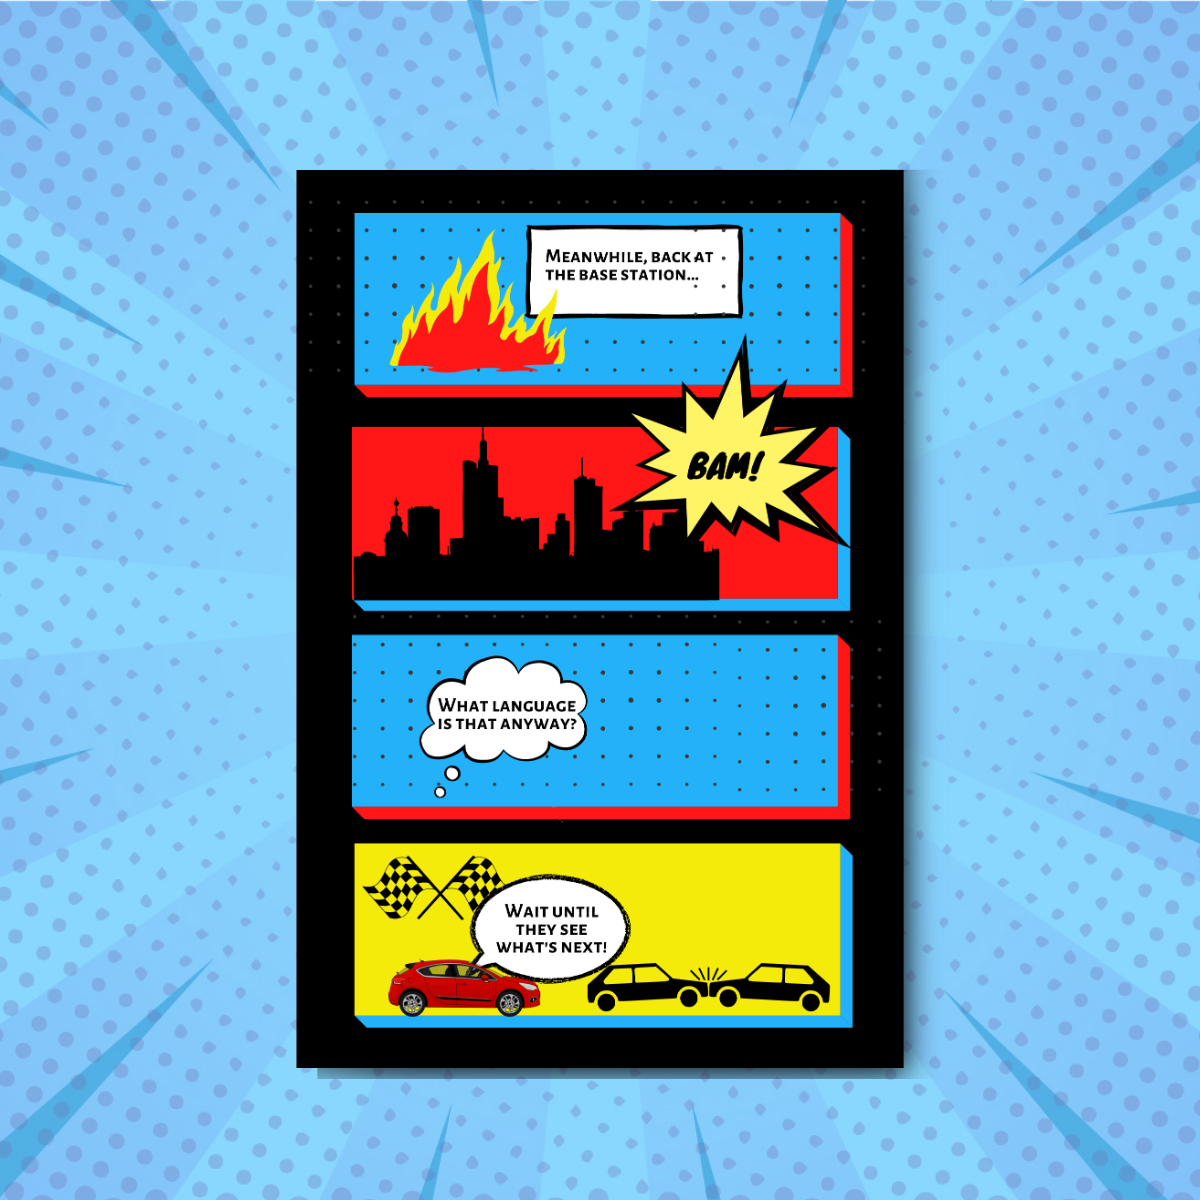 Create Your Own Comic Book